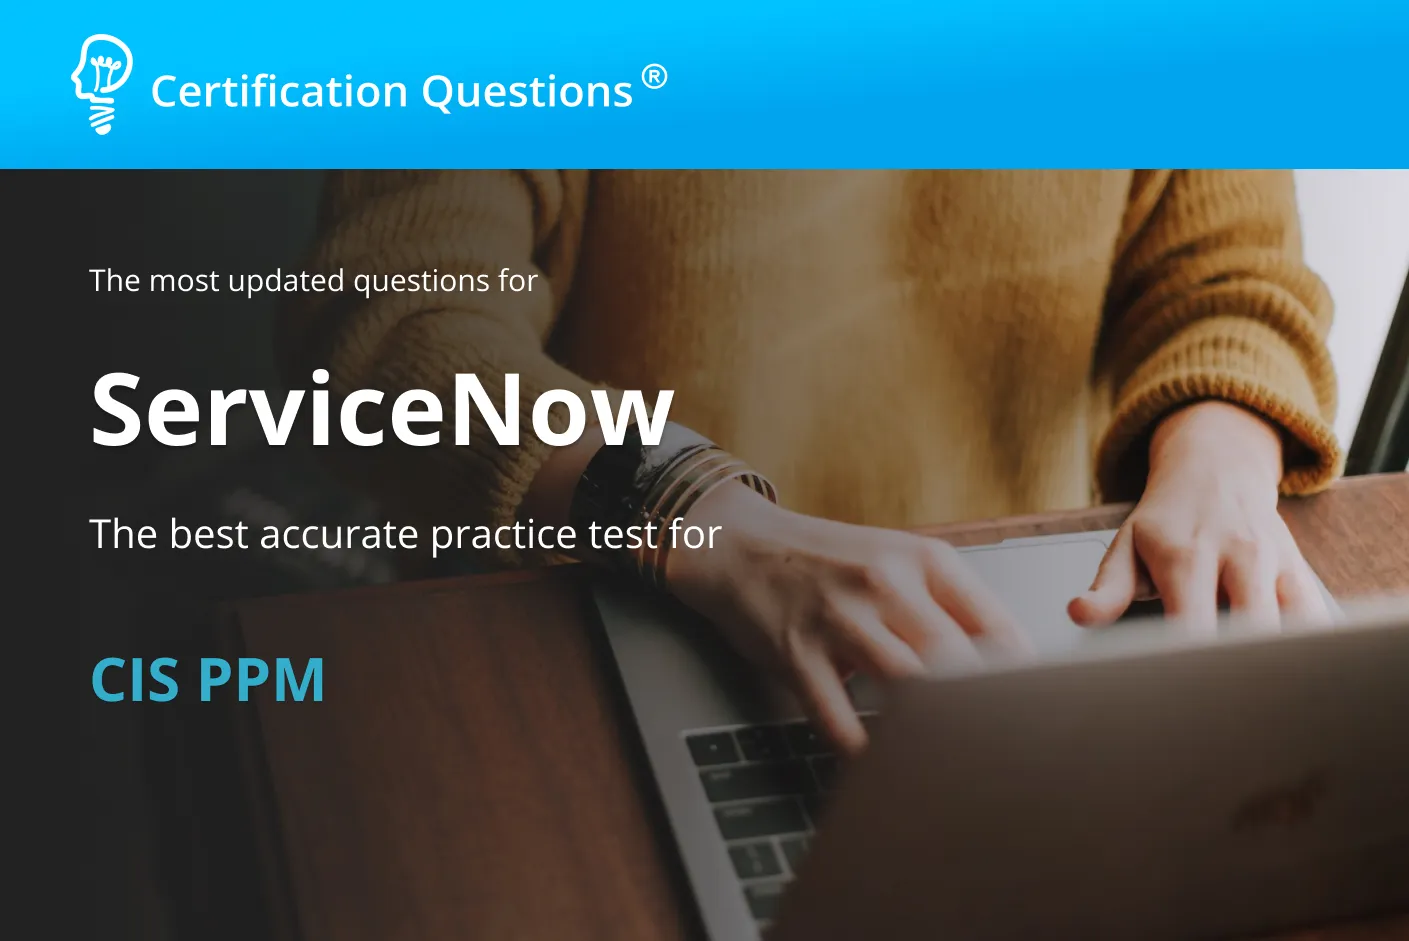 This image is related to ServiceNow CIS PPM questions